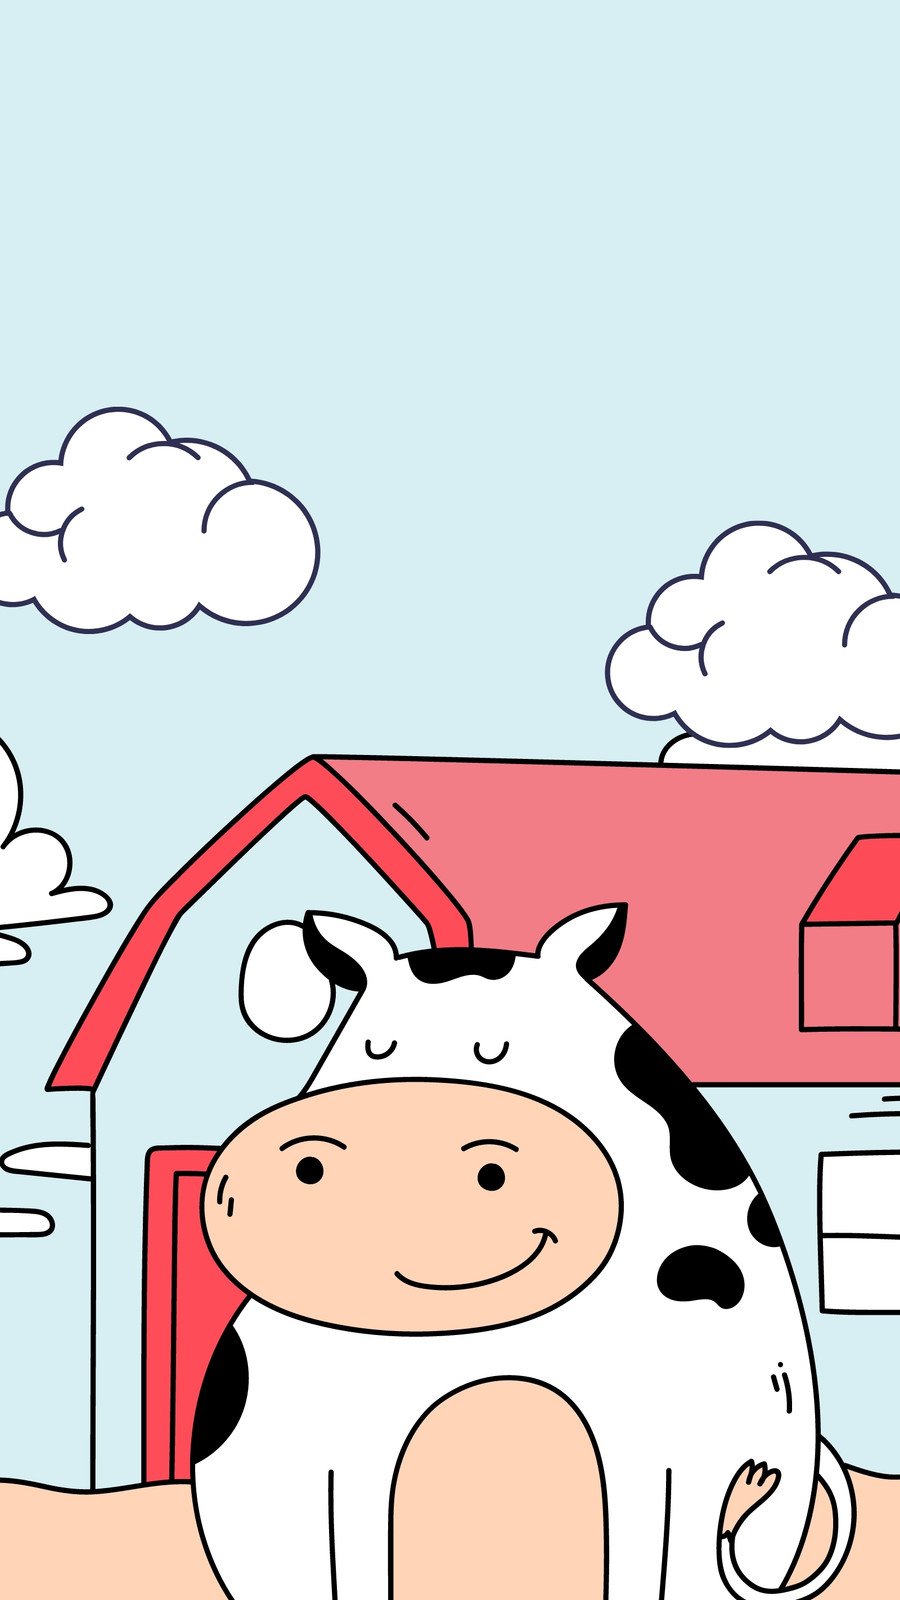 Cute Cow Fabric Wallpaper and Home Decor  Spoonflower